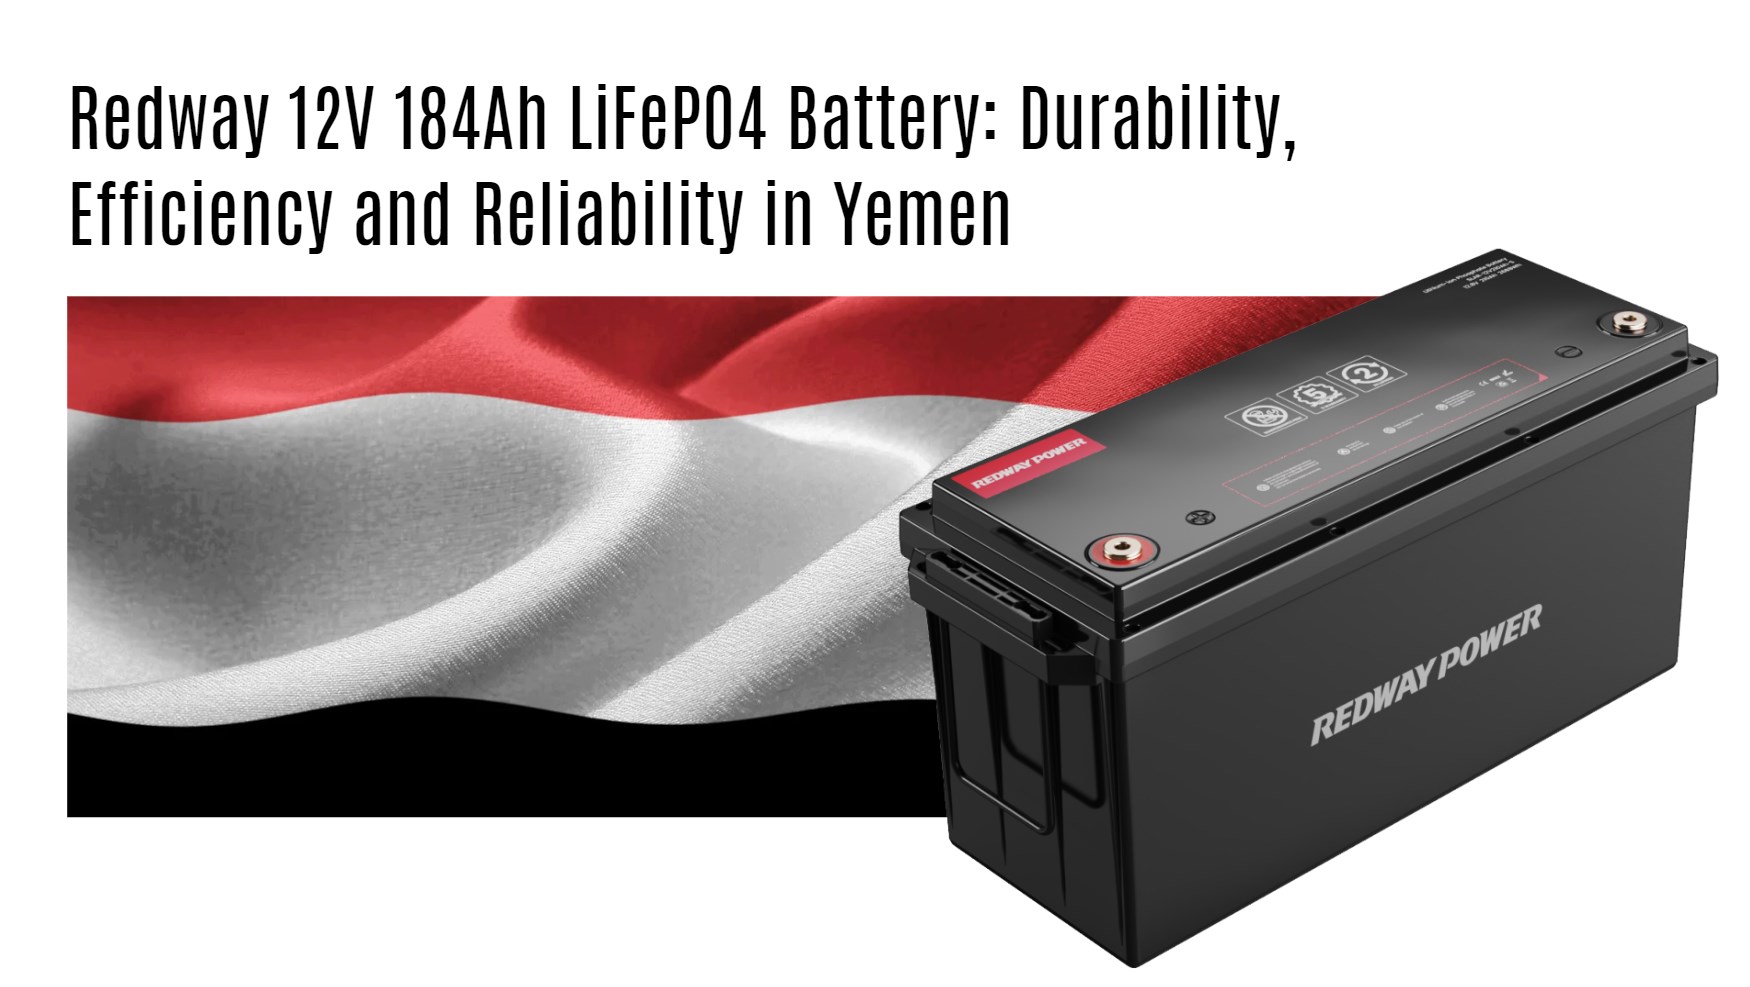 Redway 12V 184Ah LiFePO4 Battery: Durability, Efficiency and Reliability in Yemen